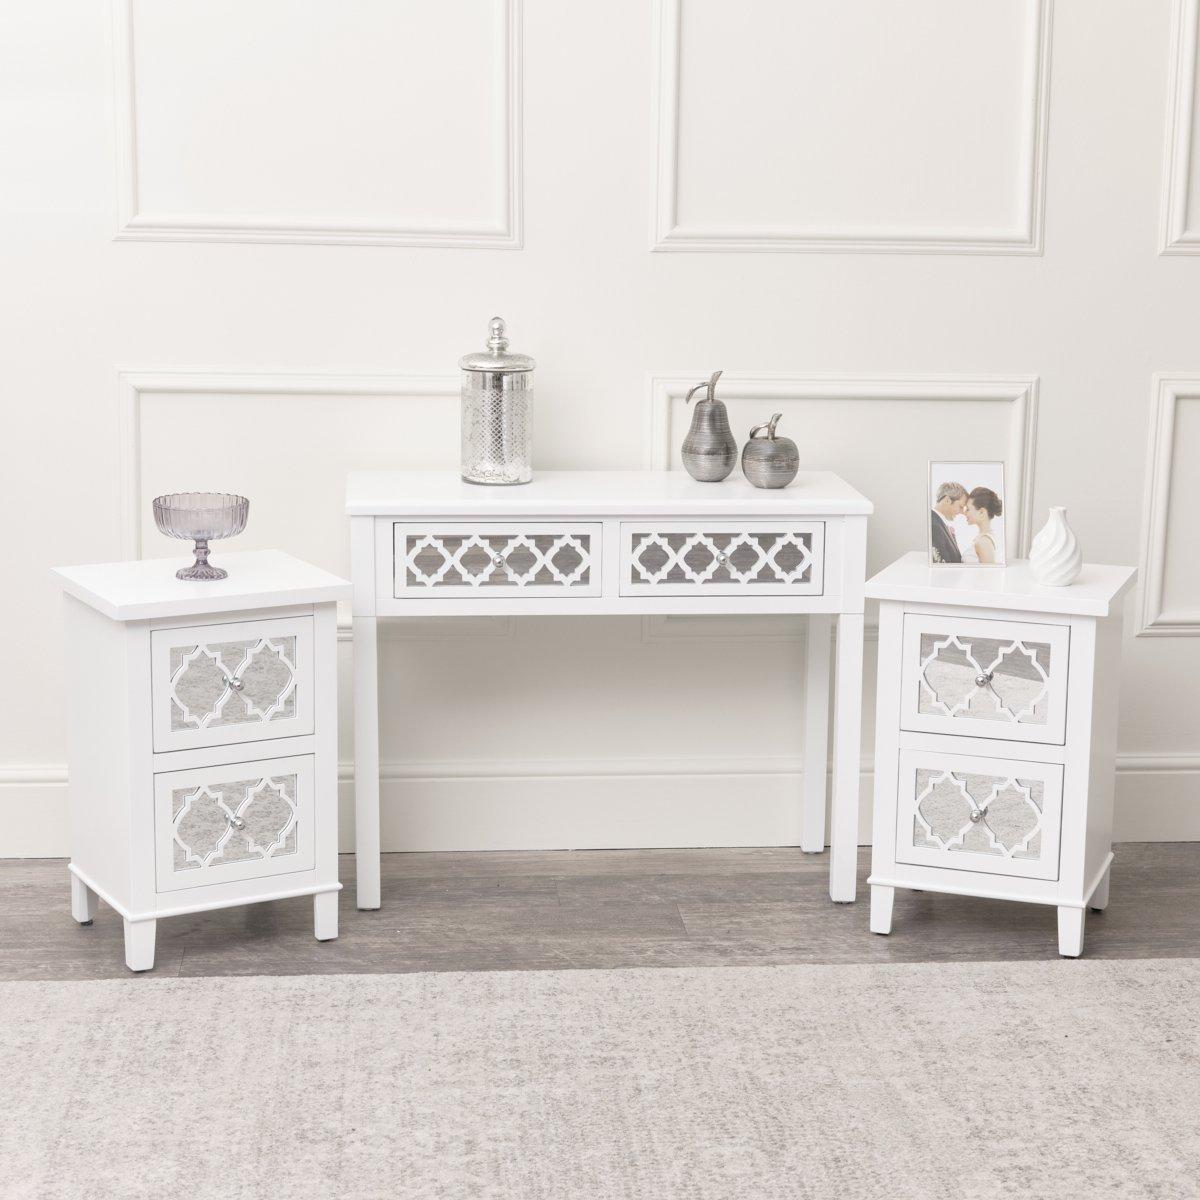 White Mirrored Console Table / Dressing Table & Pair Of White Mirrored Bedside Tables - Sabrina Whit